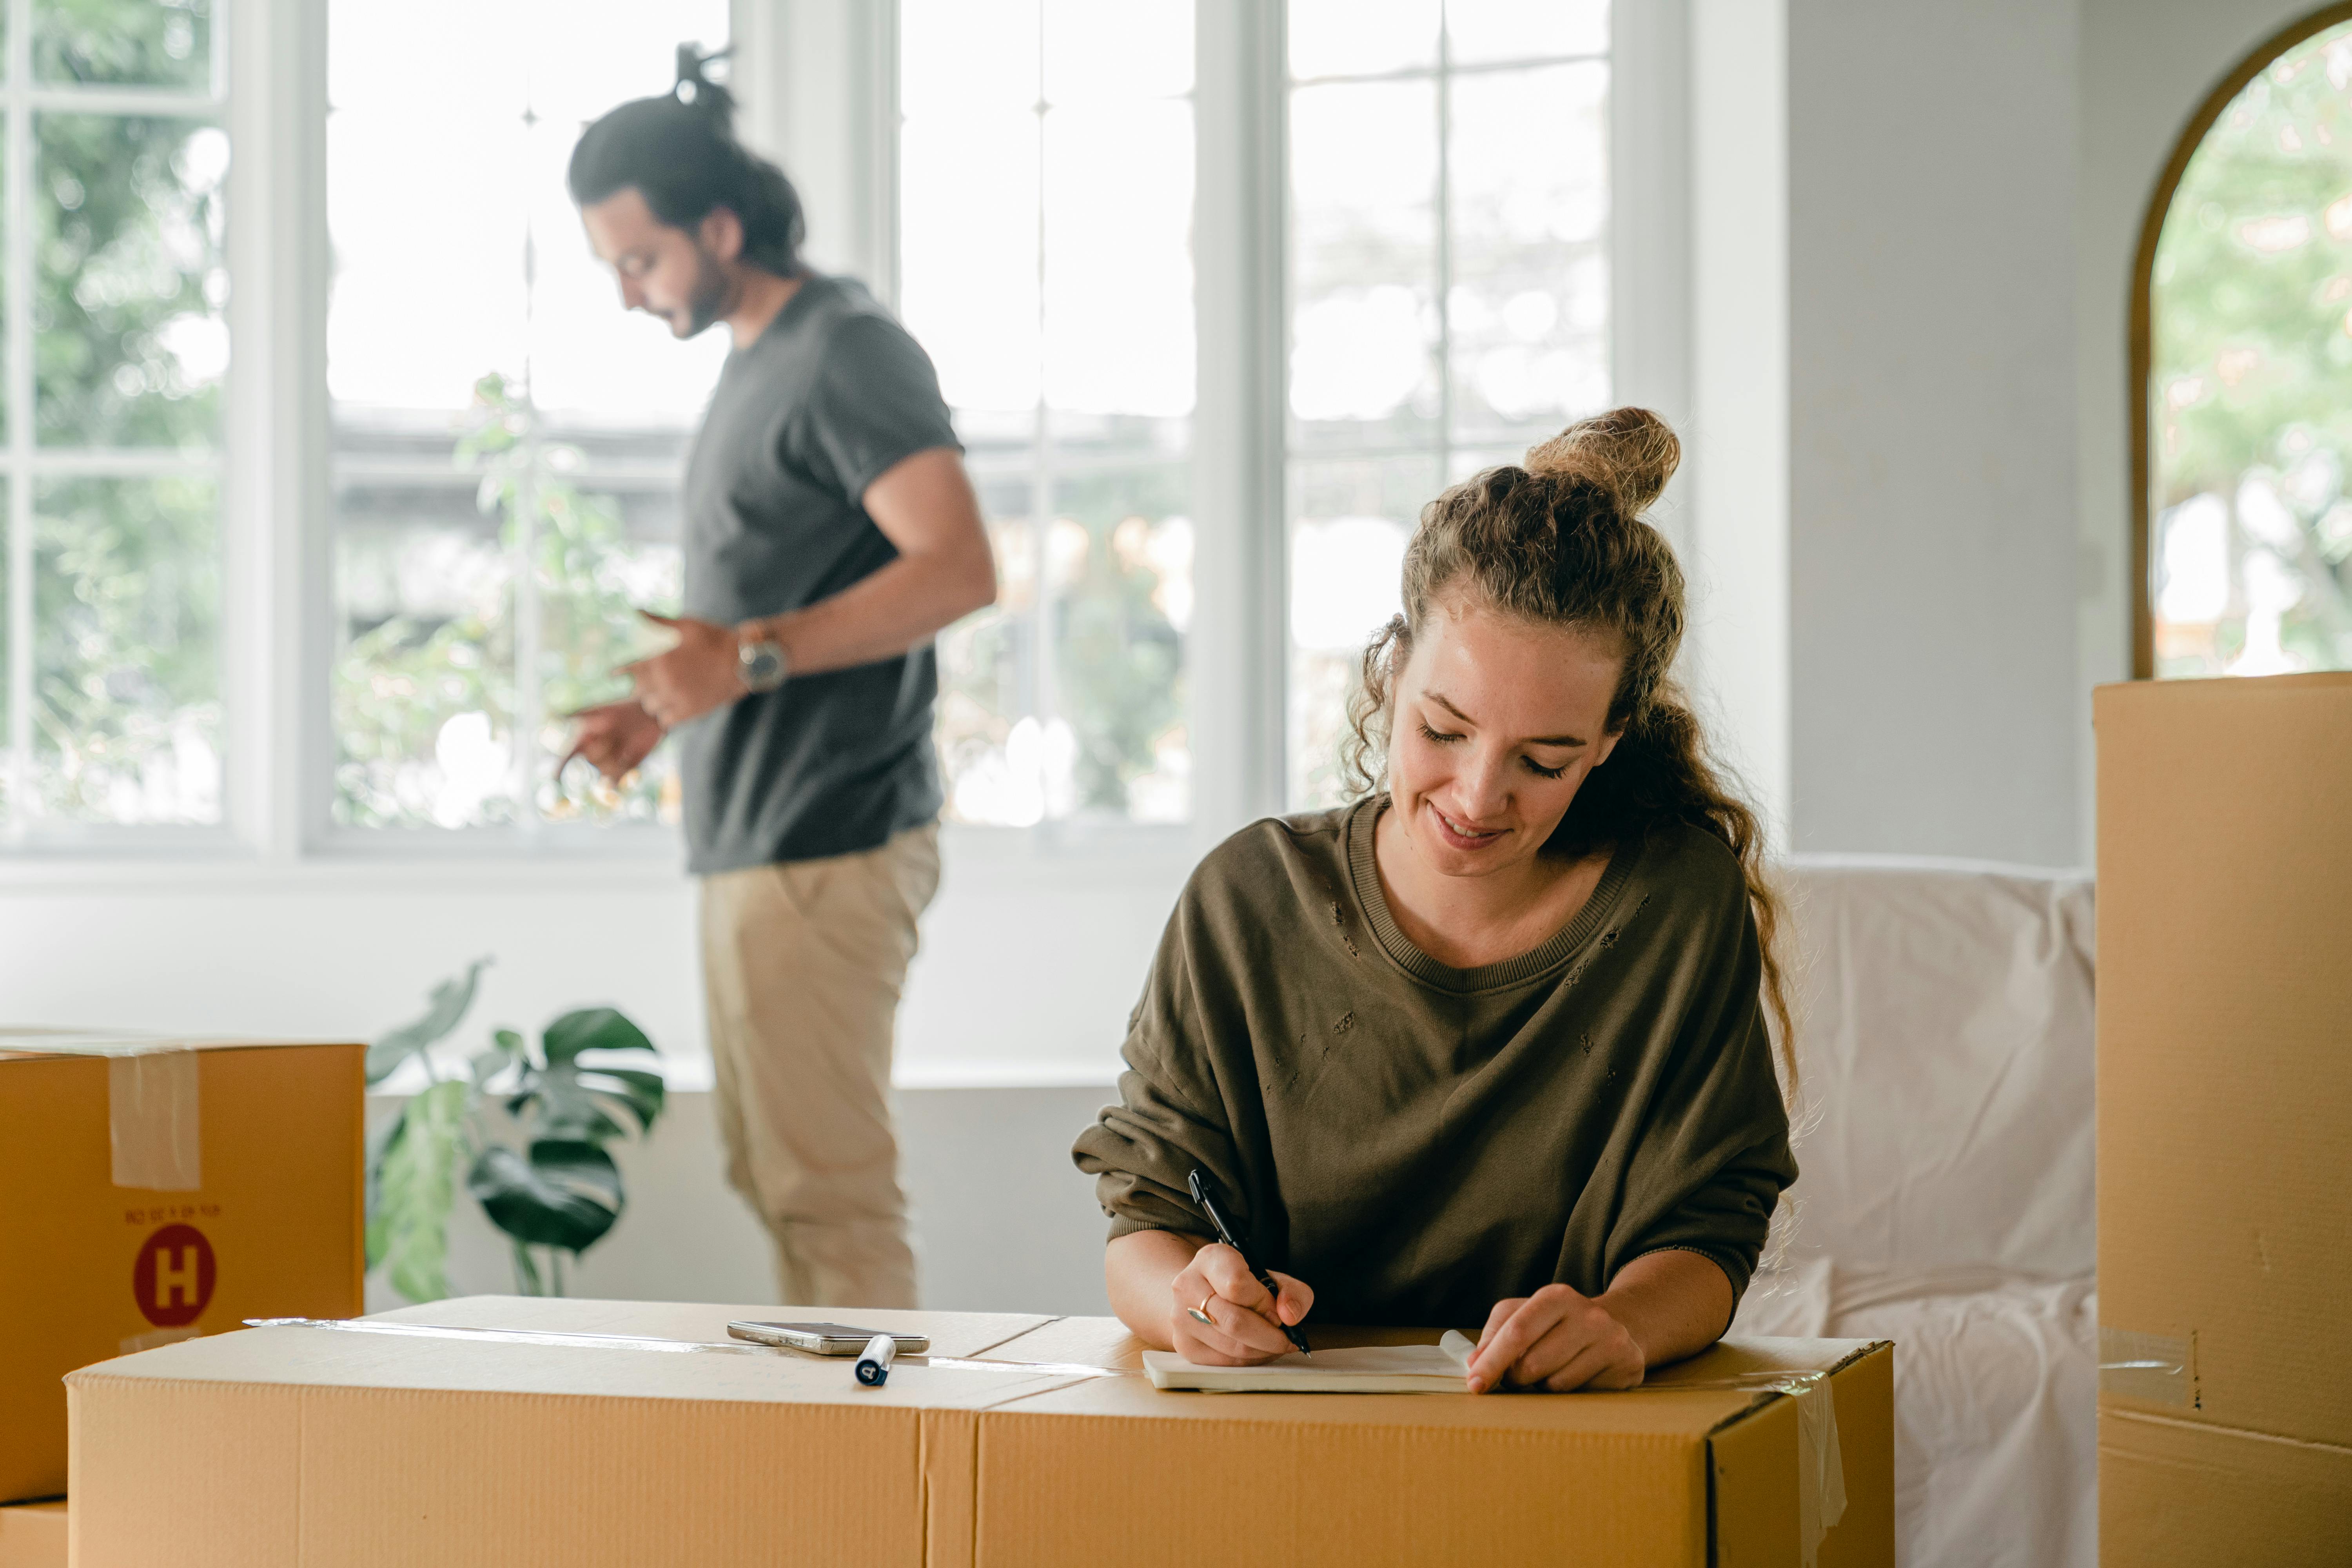 Man and woman moving into a new home, with the woman signing some papers | Source: Pexels